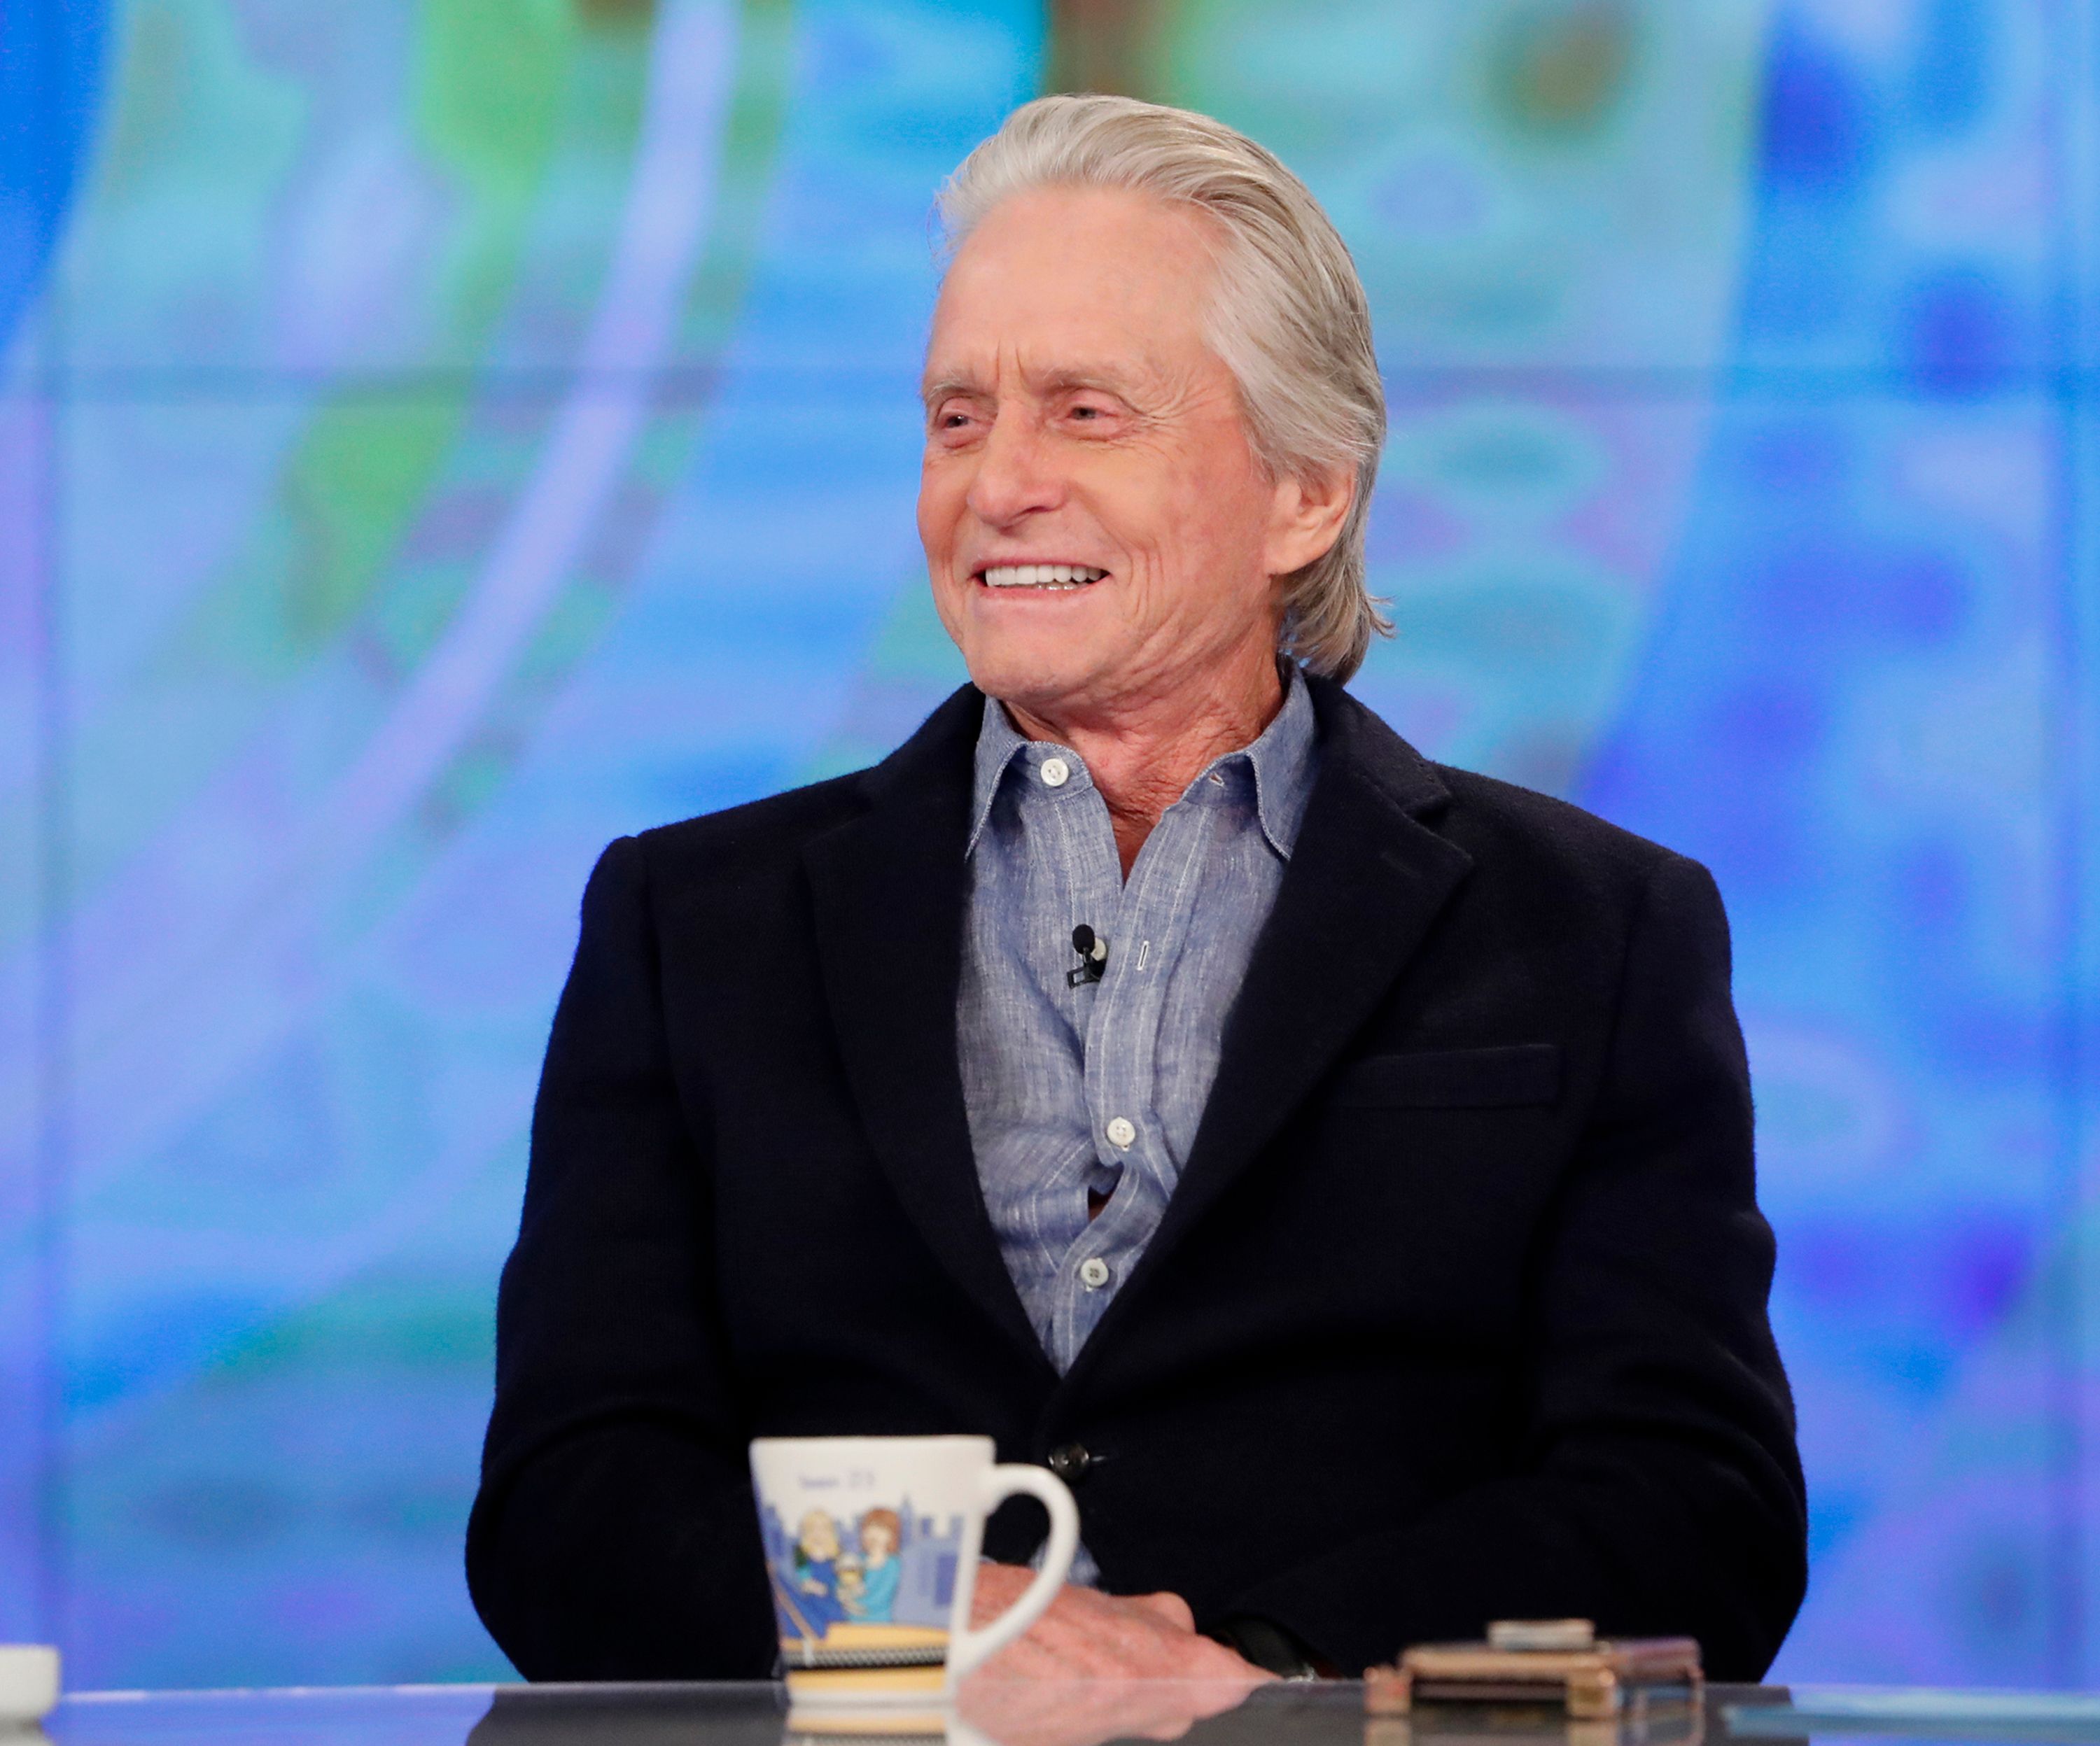 Michael Douglas as a guest  on ABC's "The View." | Getty Images